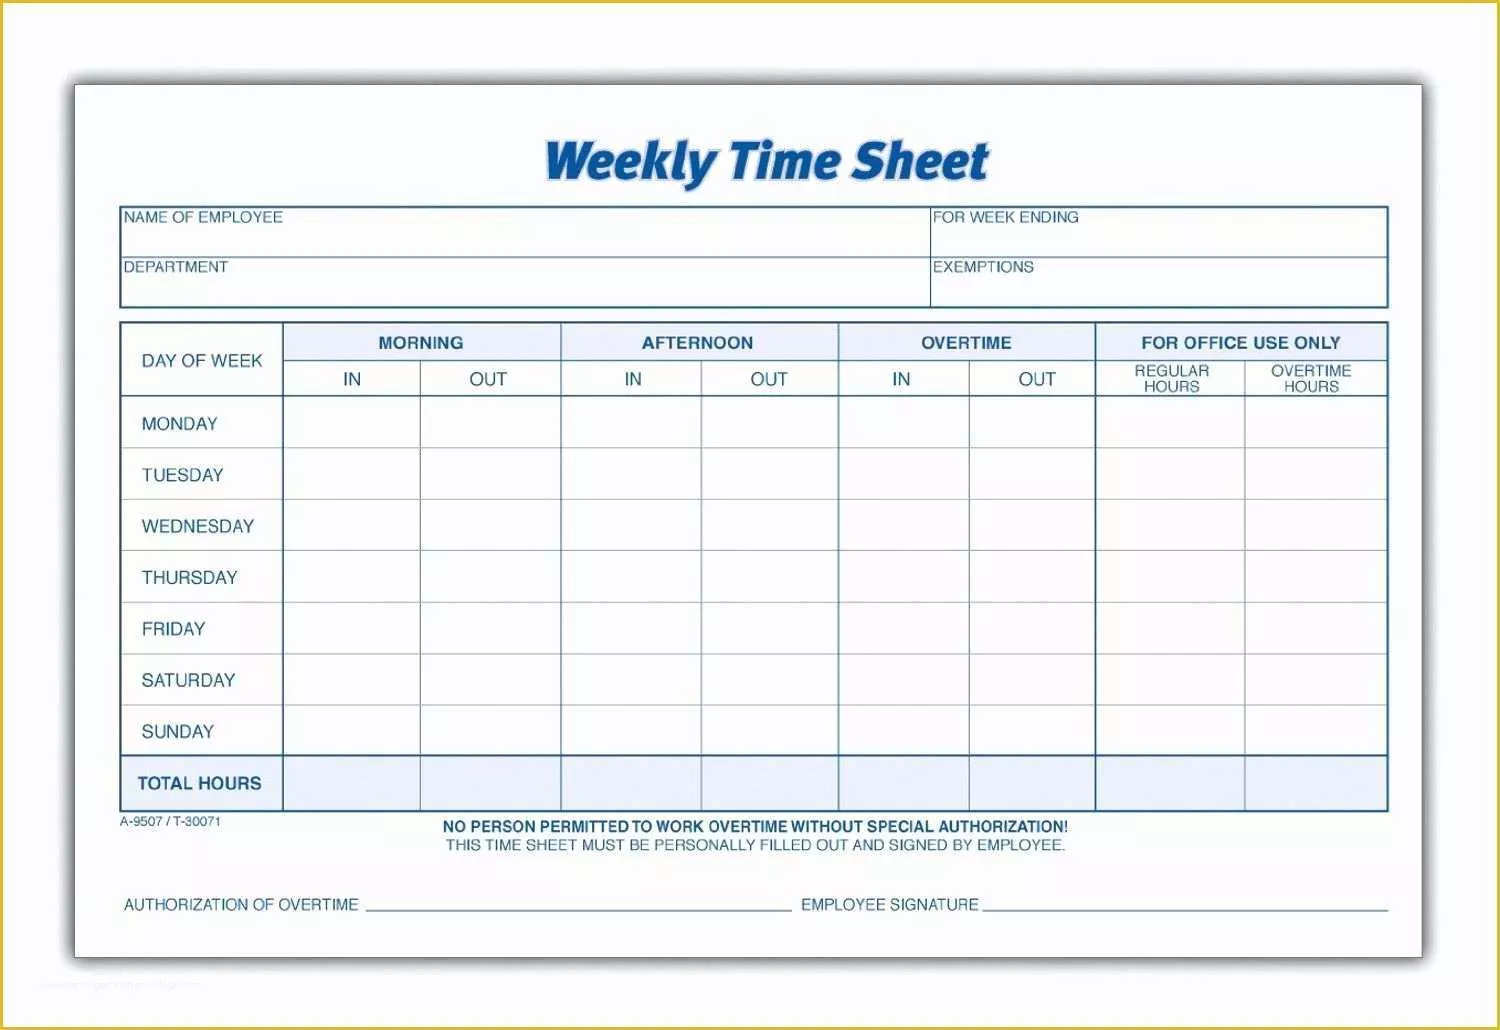 Timesheet Invoice Template Free Of Weekly Employee Time Sheet Projects to Try